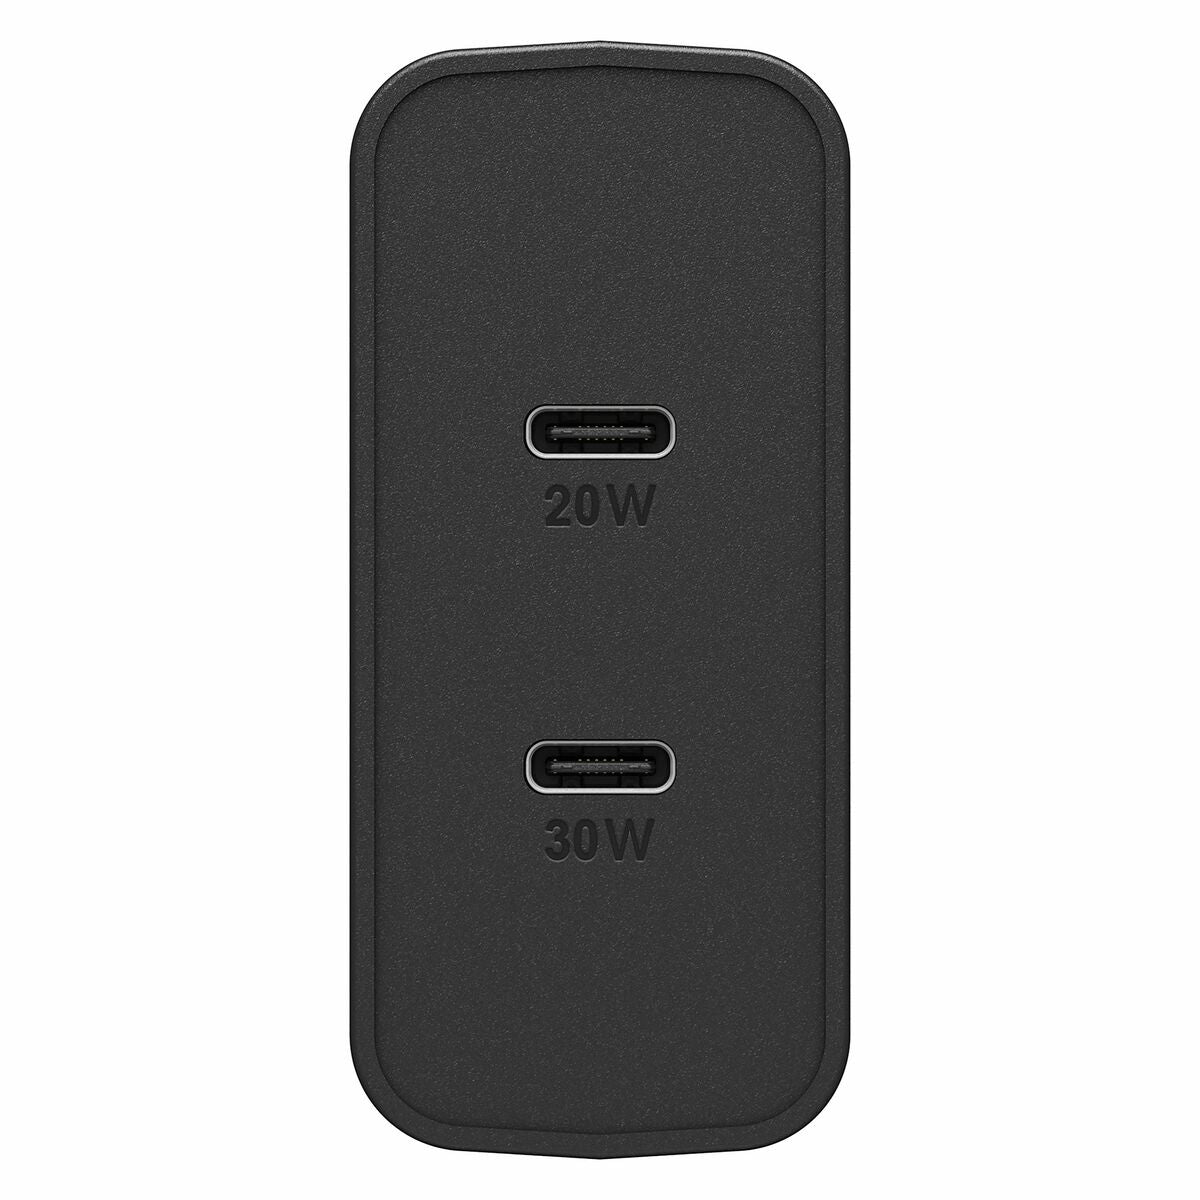 Portable charger Otterbox 78-52724 Black